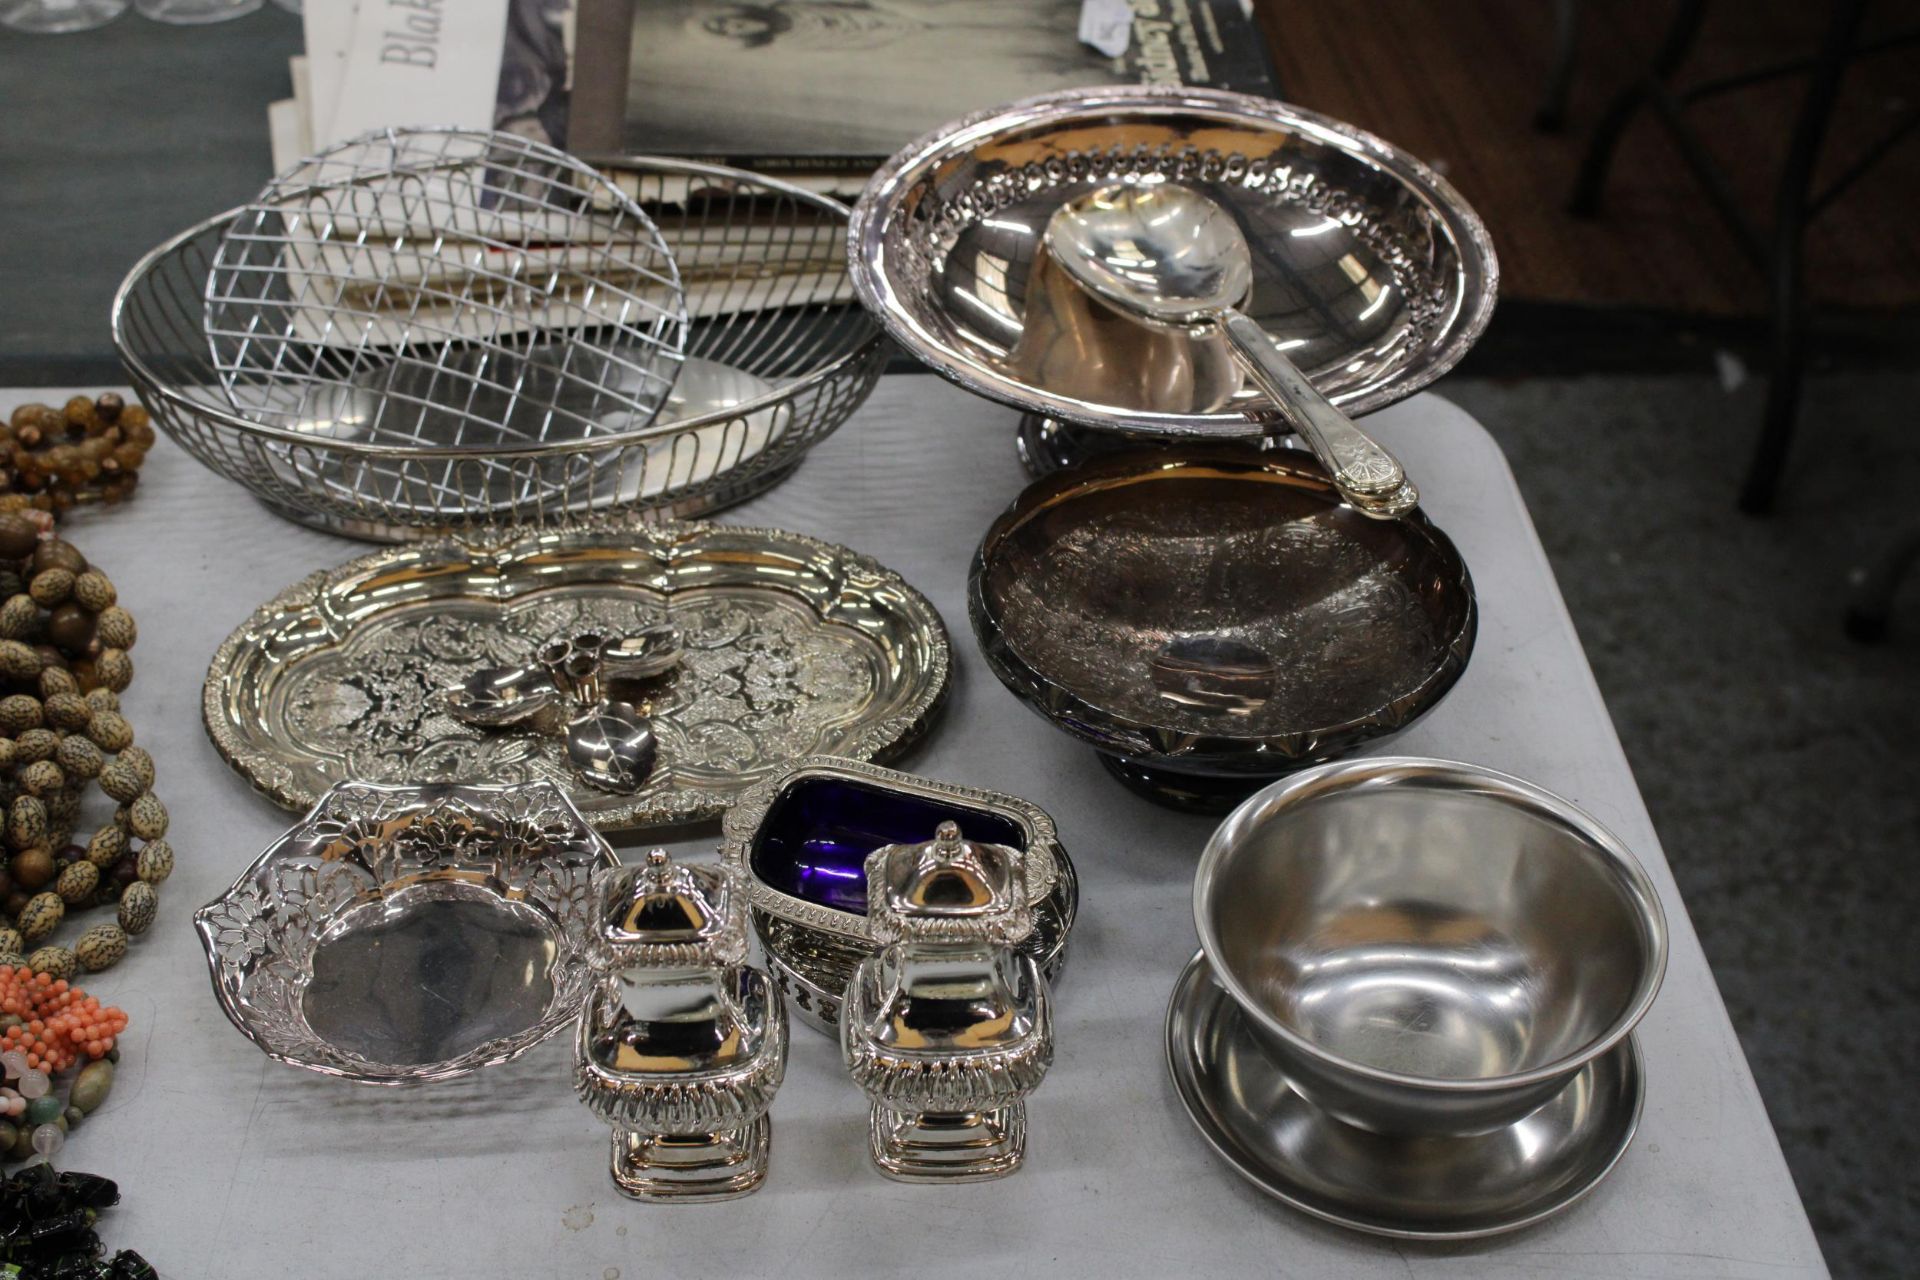 A QUANTITY OF SILVER A CRUET SET, TRAY, SALAD SERVERS, ETCPLATED ITEMS TO INCLUDE BOWLS,